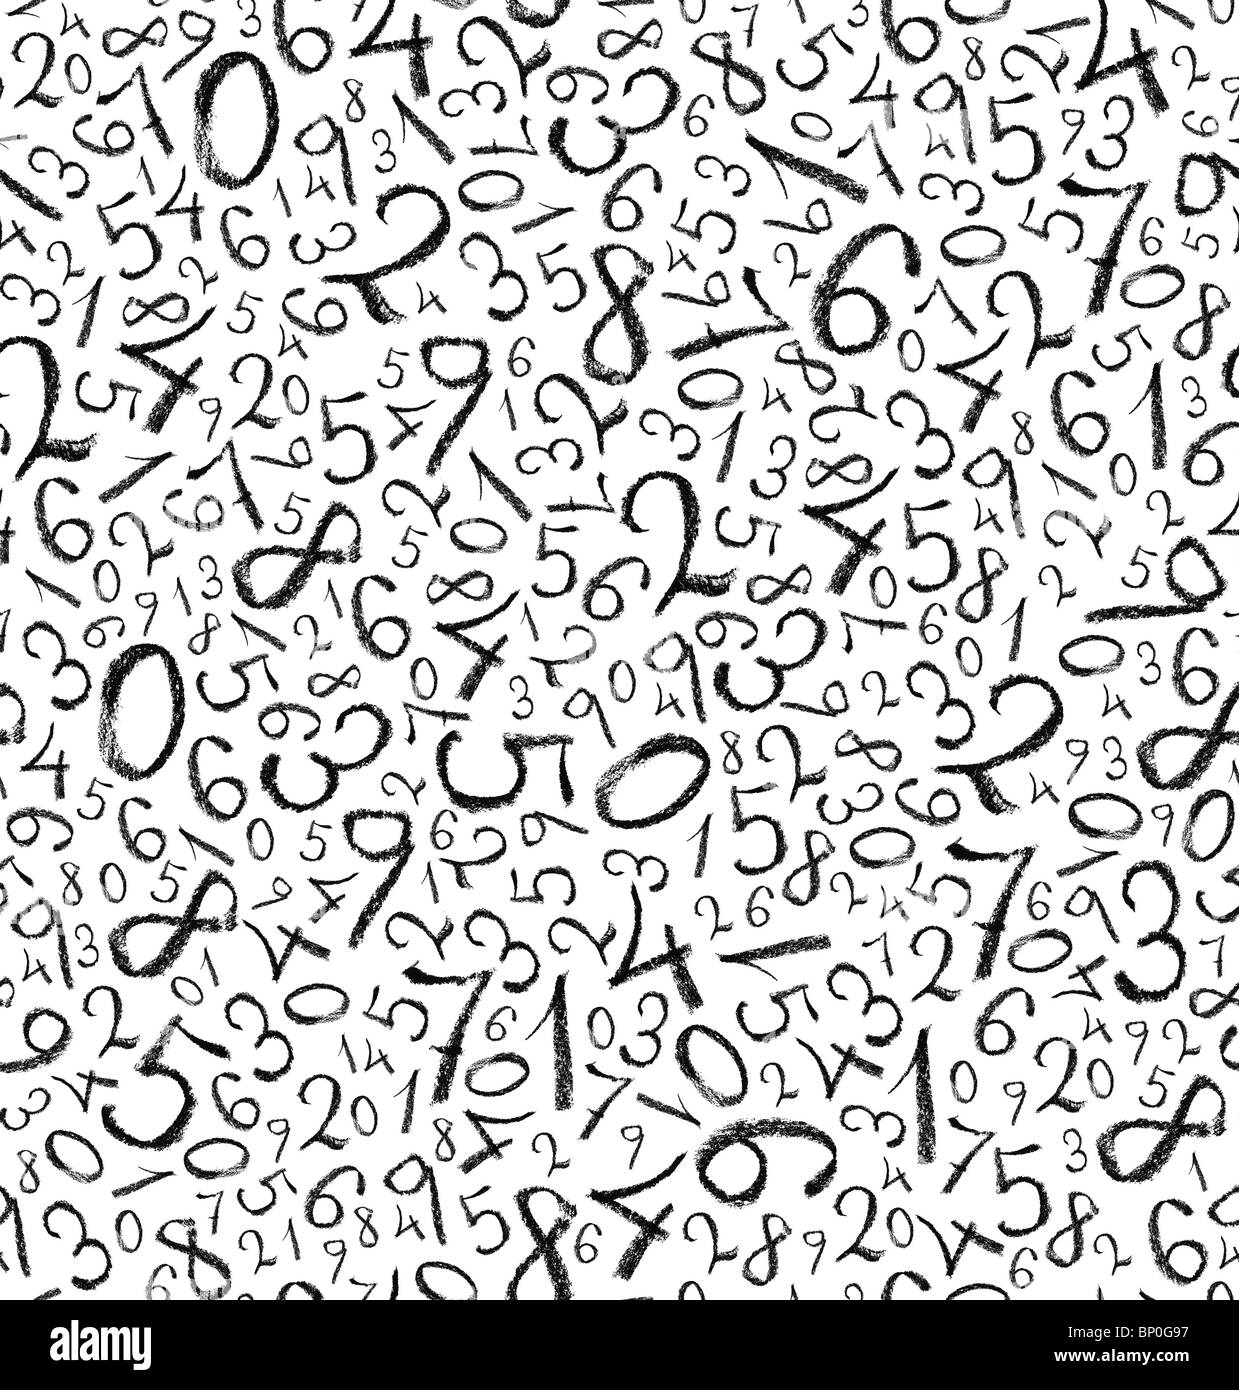 Numbers illustration Black and White Stock Photos & Images - Alamy